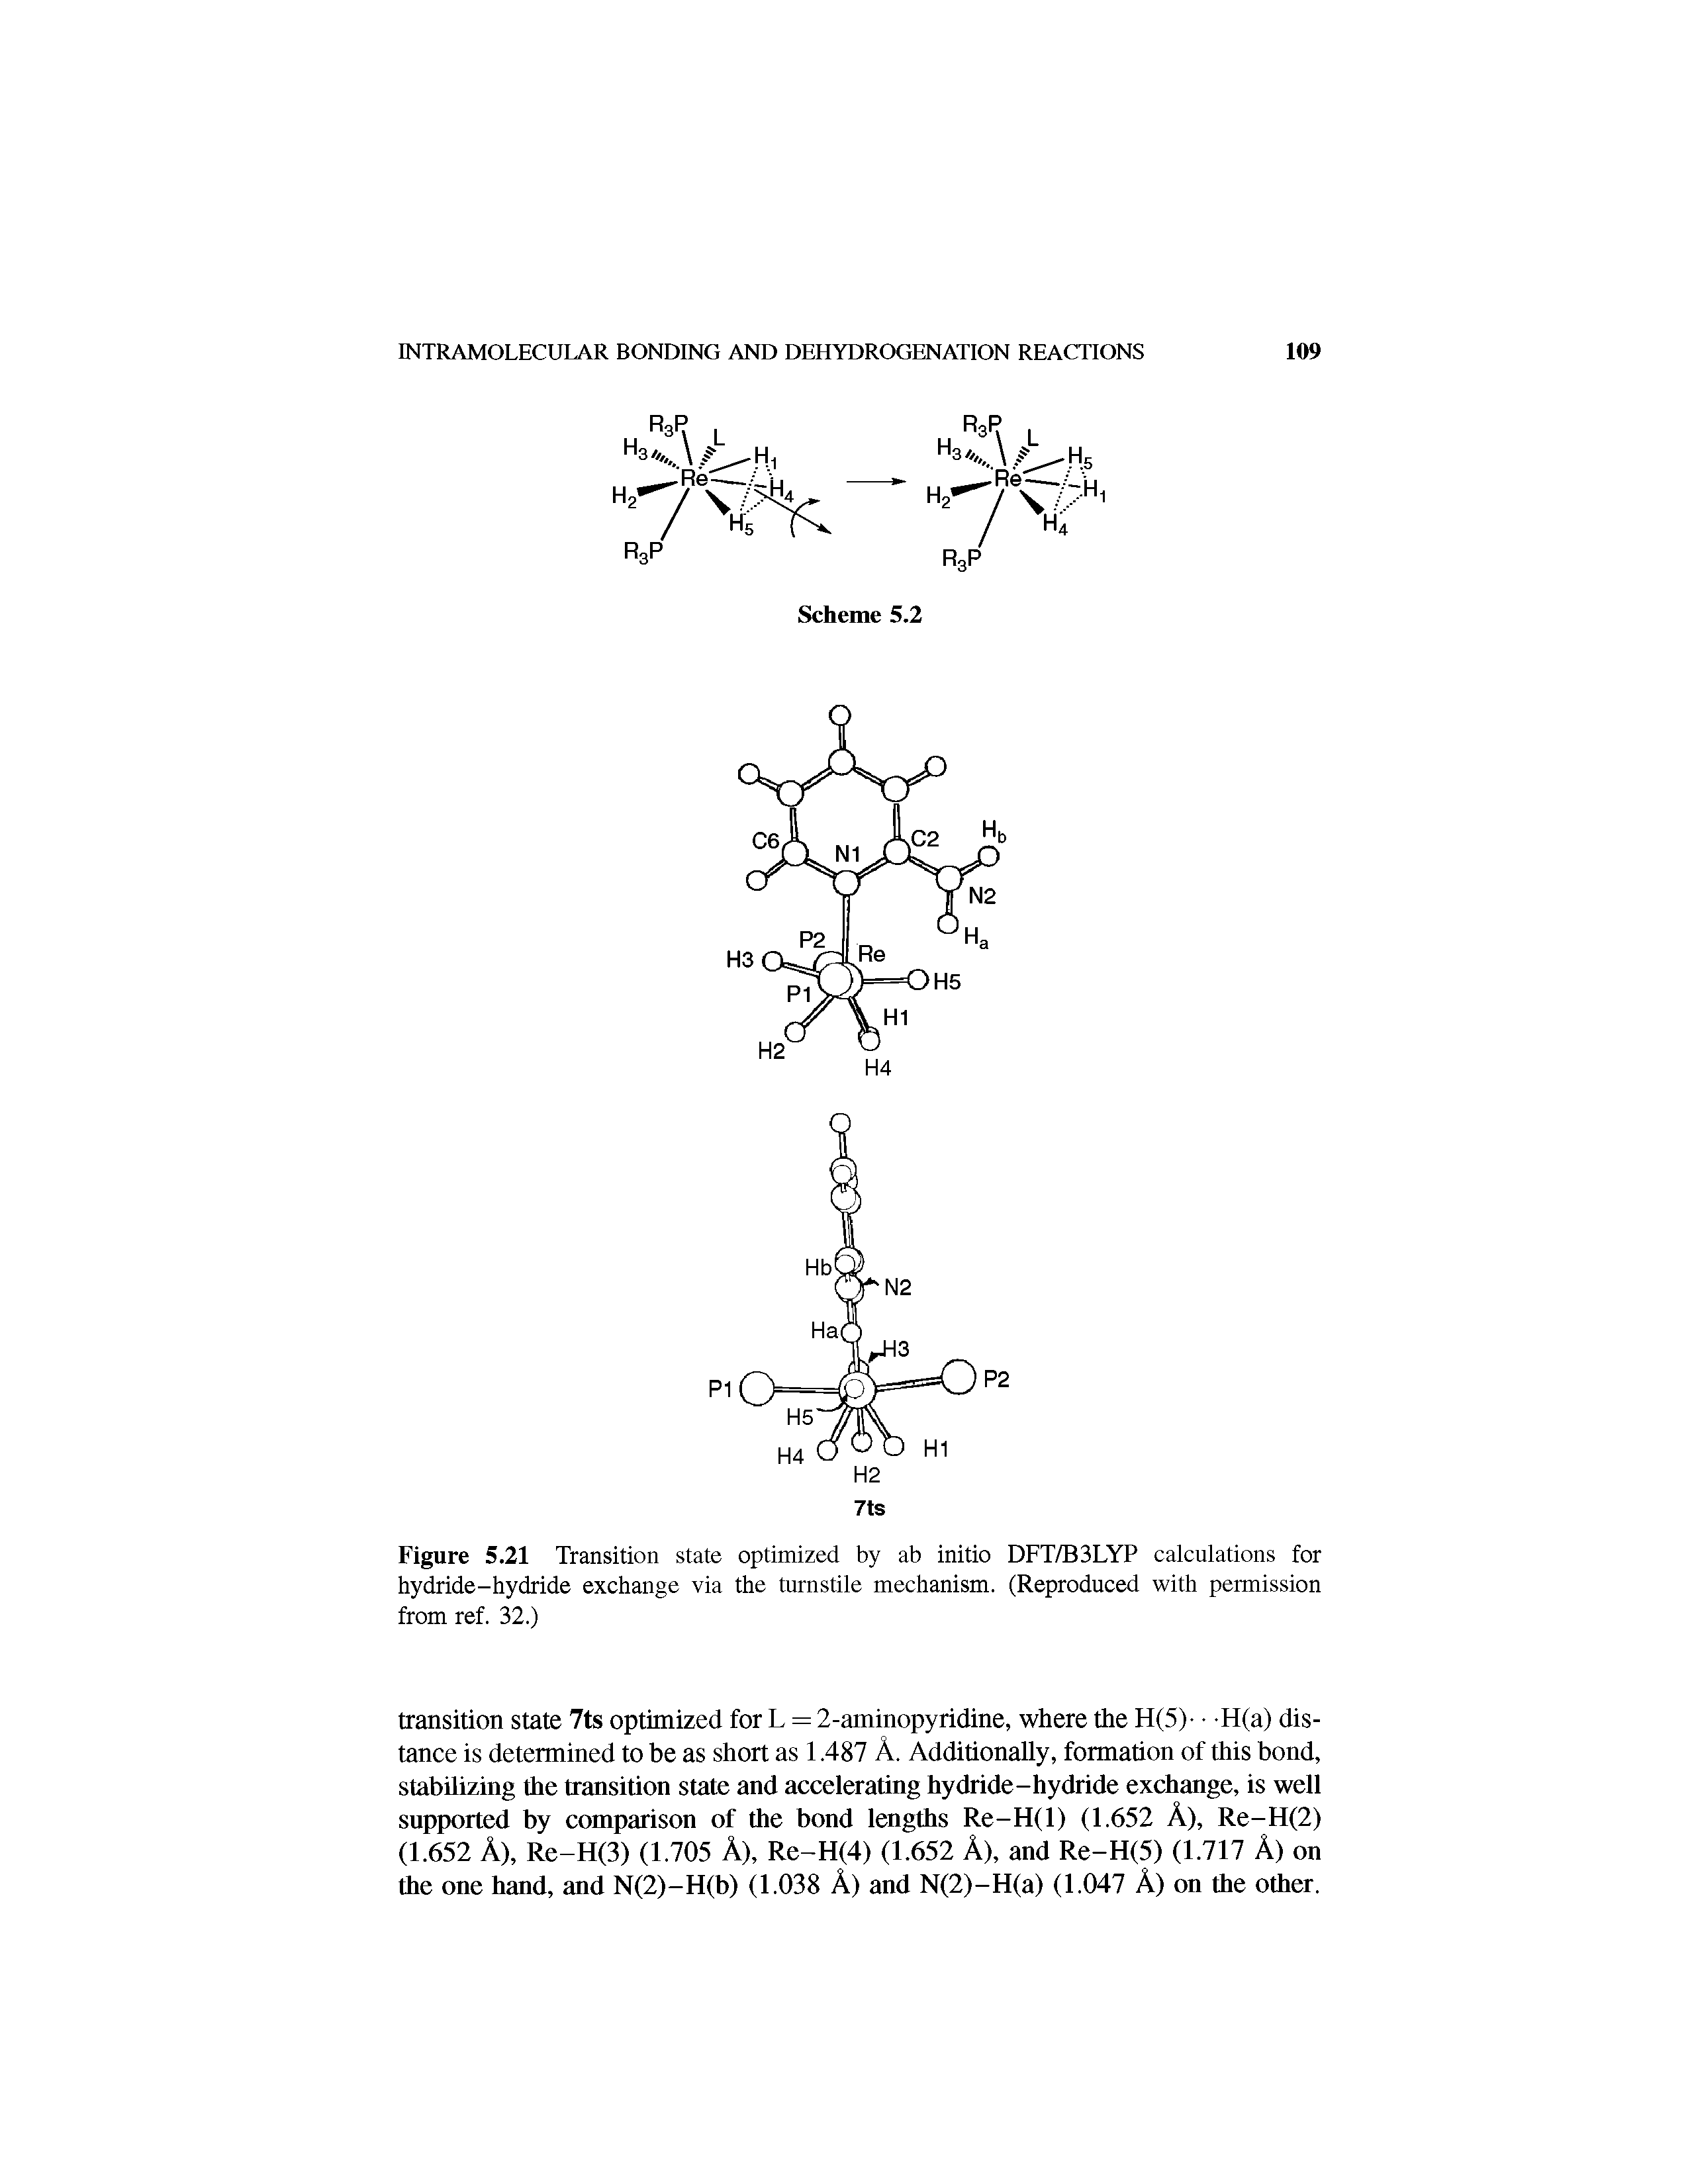 Figure 5.21 Transition state optimized by ab initio DFT/B3LYP calculations for hydride-hydride exchange via the turnstile mechanism. (Reproduced with permission from ref. 32.)...